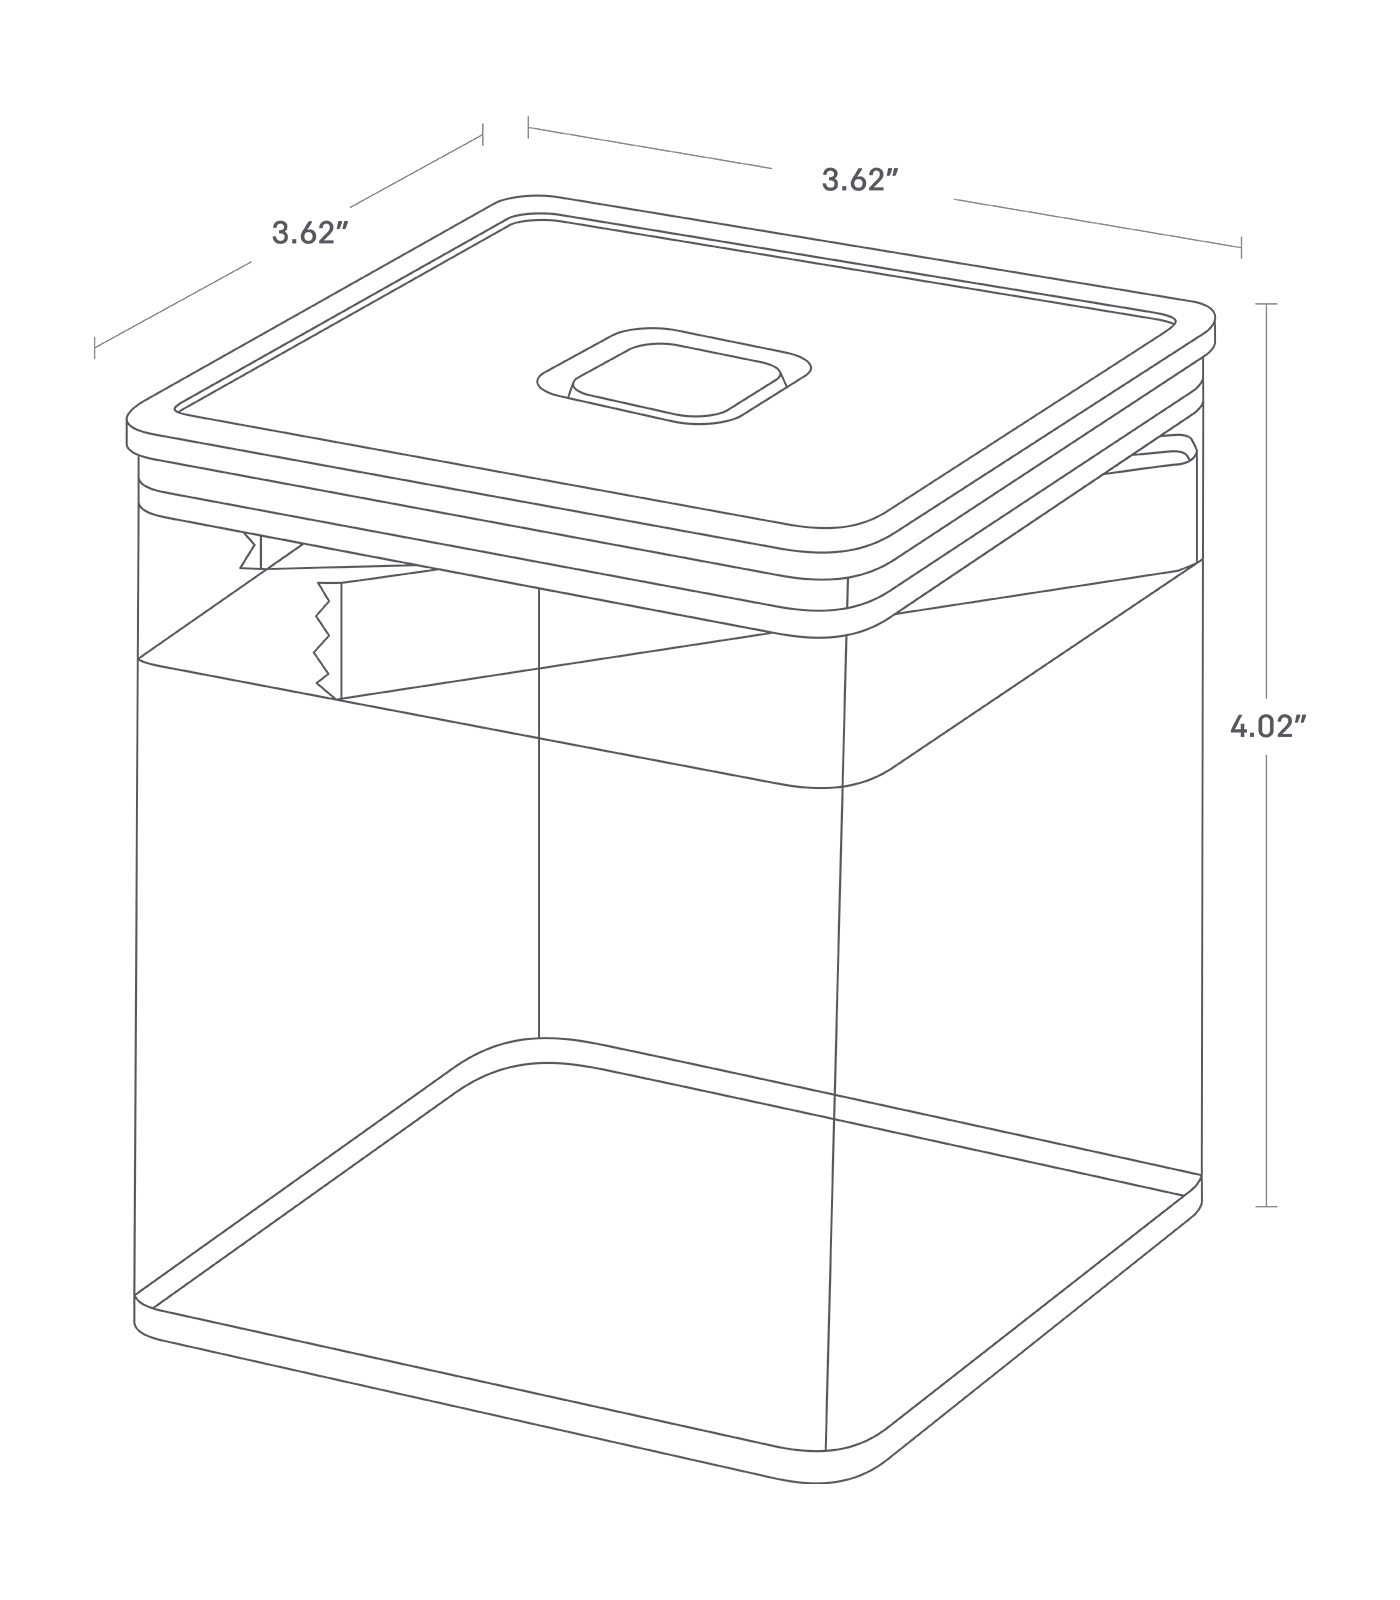 Dimension image for Vacuum-Sealing Food Container - Tongs showing a length/width of 3.62